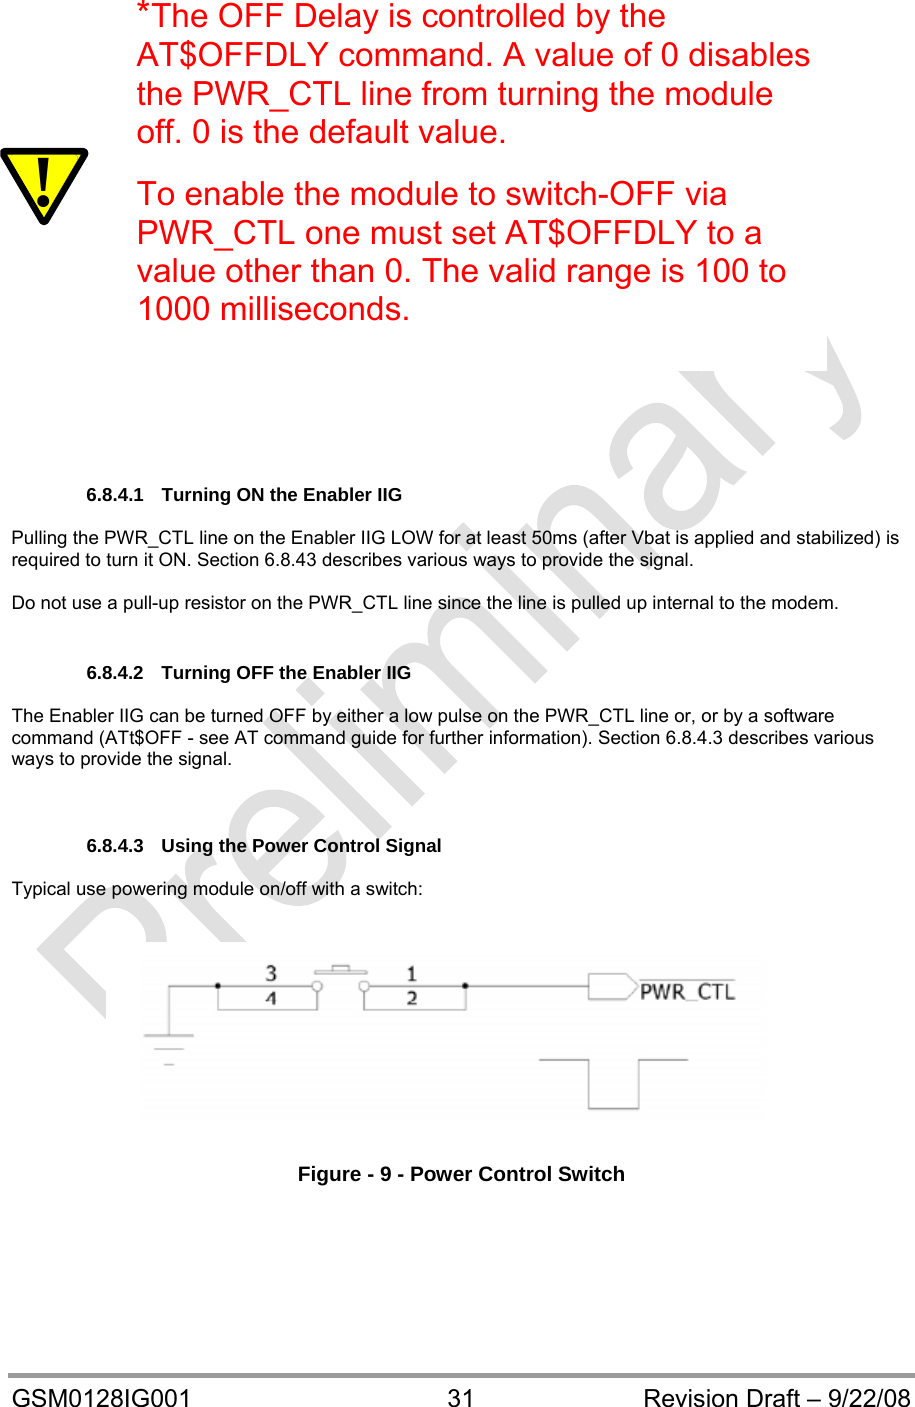  GSM0128IG001  31  Revision Draft – 9/22/08                        6.8.4.1  Turning ON the Enabler IIG   Pulling the PWR_CTL line on the Enabler IIG LOW for at least 50ms (after Vbat is applied and stabilized) is required to turn it ON. Section 6.8.43 describes various ways to provide the signal.  Do not use a pull-up resistor on the PWR_CTL line since the line is pulled up internal to the modem.  6.8.4.2  Turning OFF the Enabler IIG  The Enabler IIG can be turned OFF by either a low pulse on the PWR_CTL line or, or by a software command (ATt$OFF - see AT command guide for further information). Section 6.8.4.3 describes various ways to provide the signal.    6.8.4.3  Using the Power Control Signal    Typical use powering module on/off with a switch:     Figure - 9 - Power Control Switch      ! *The OFF Delay is controlled by the AT$OFFDLY command. A value of 0 disables the PWR_CTL line from turning the module off. 0 is the default value.  To enable the module to switch-OFF via PWR_CTL one must set AT$OFFDLY to a value other than 0. The valid range is 100 to 1000 milliseconds.   